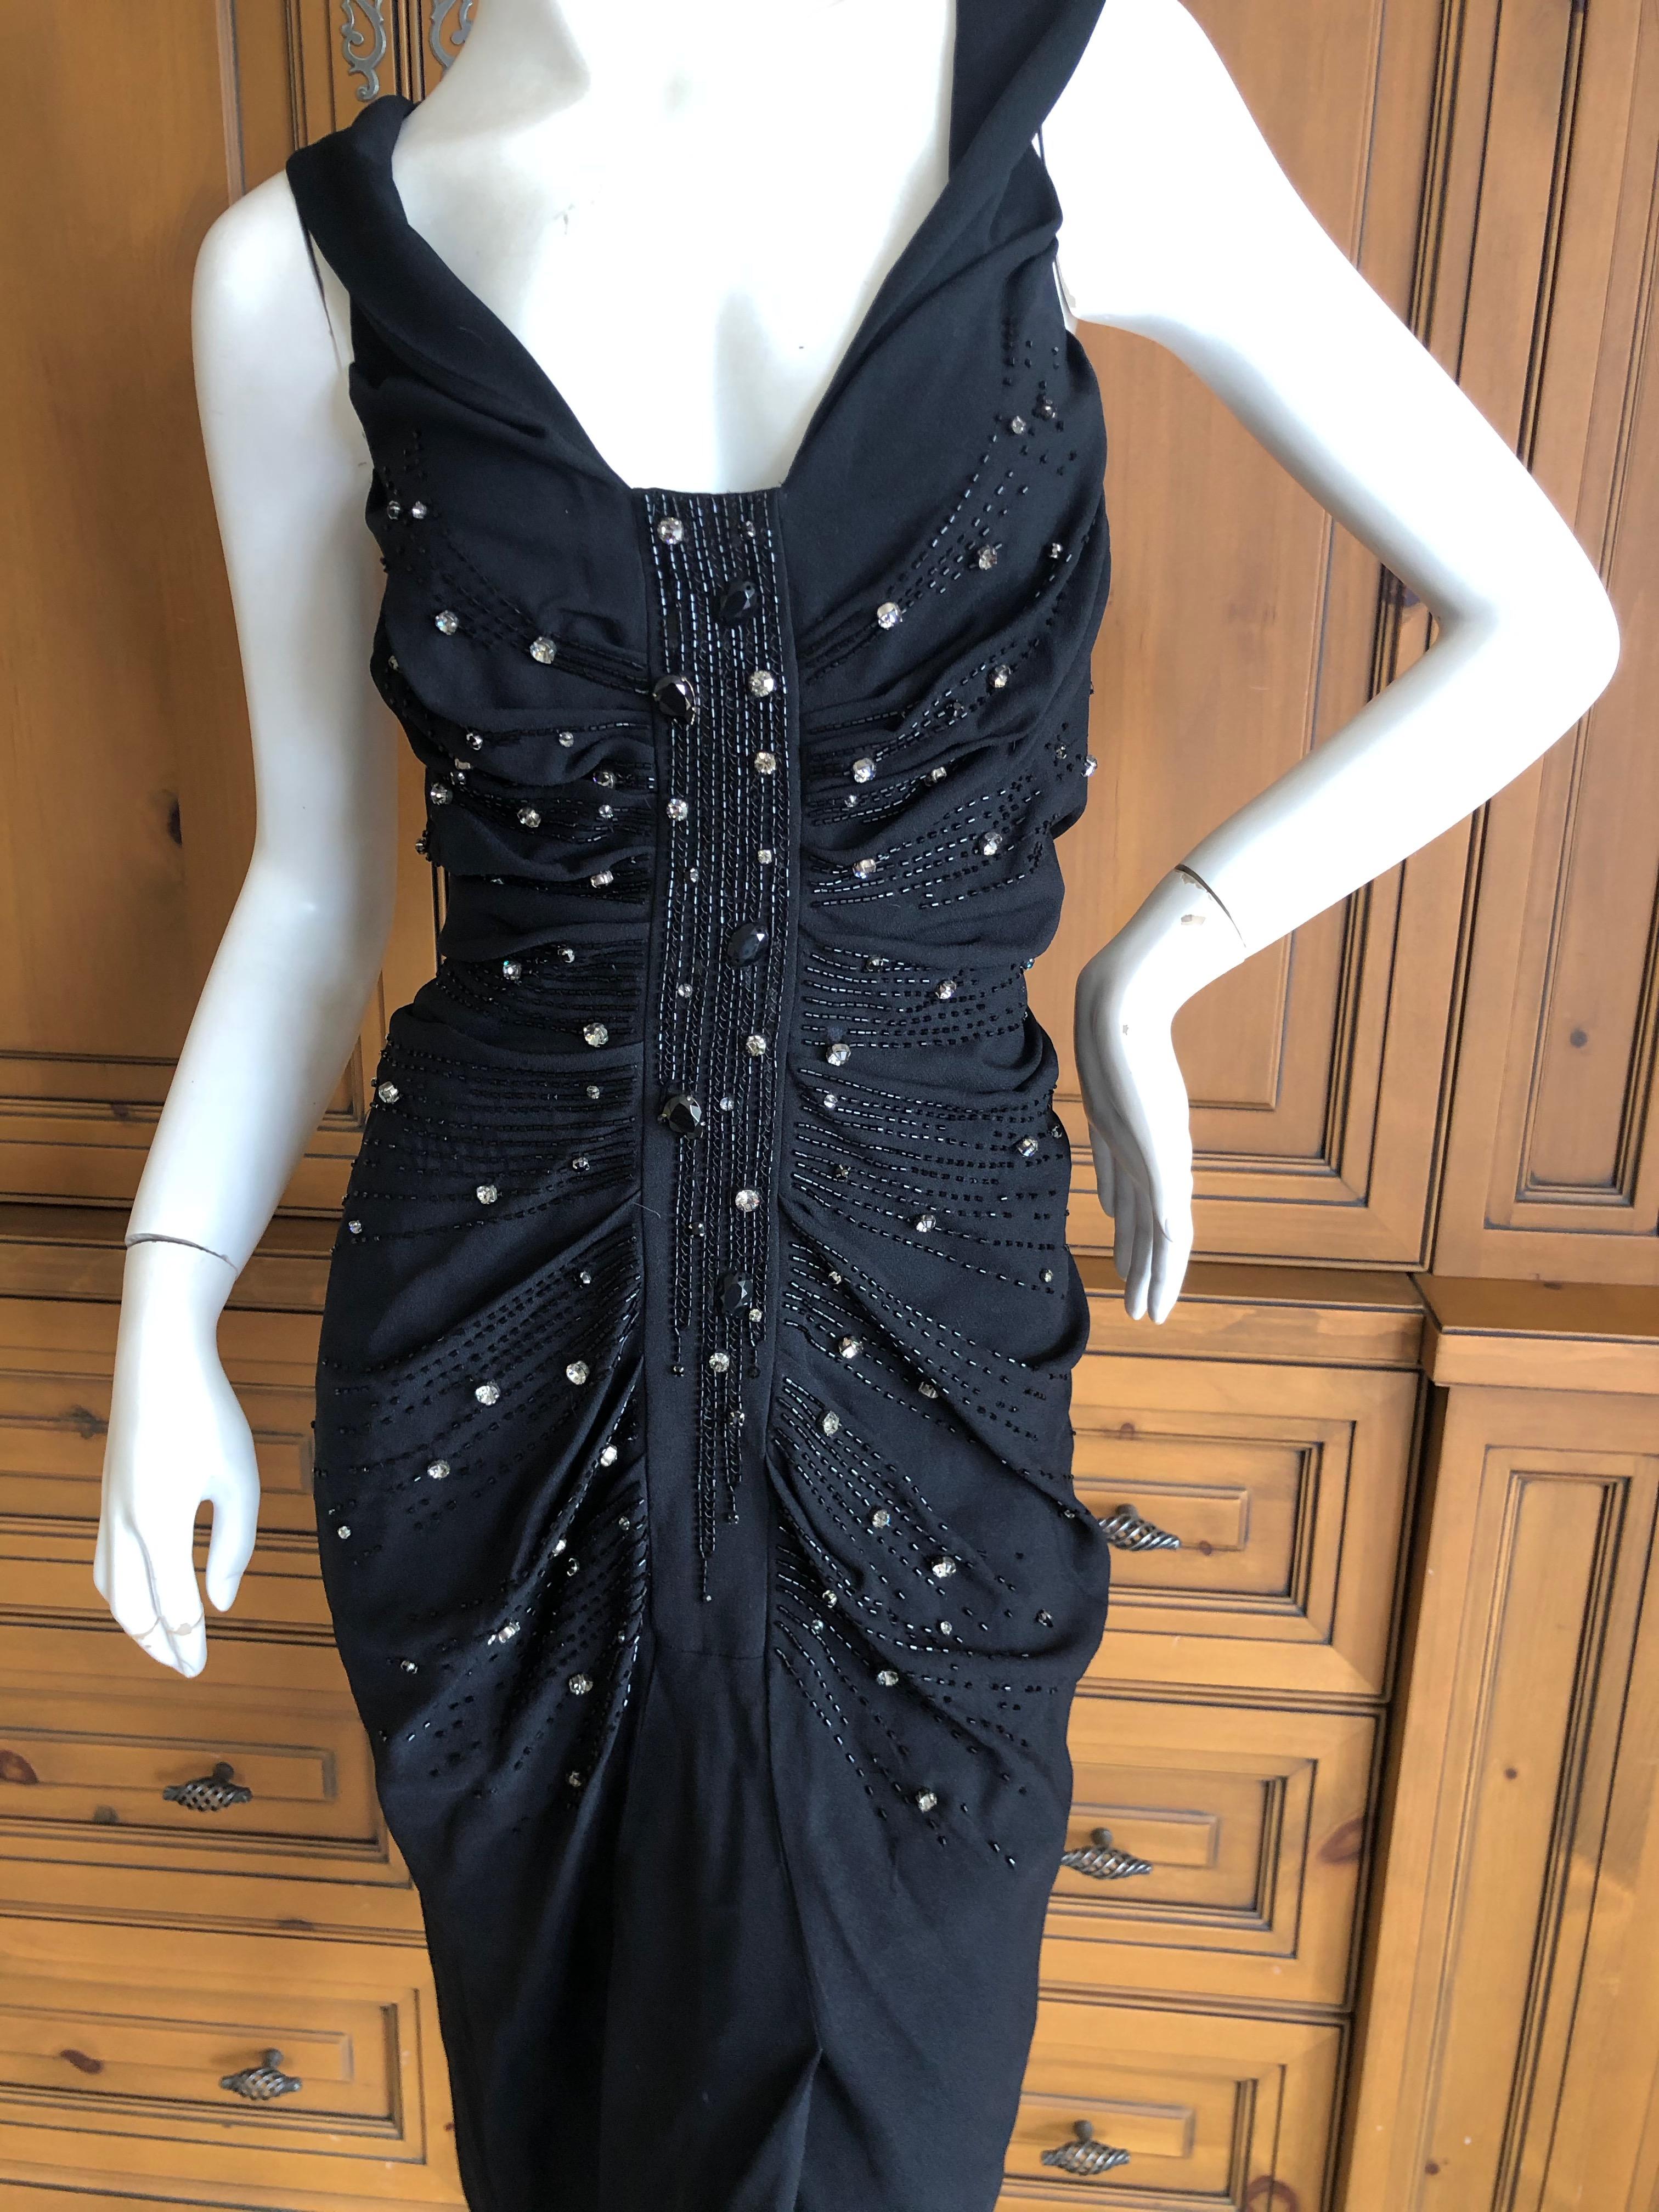 Christian Dior by John Galliano Black Jewel Embellished Cocktail Dress In Excellent Condition For Sale In Cloverdale, CA